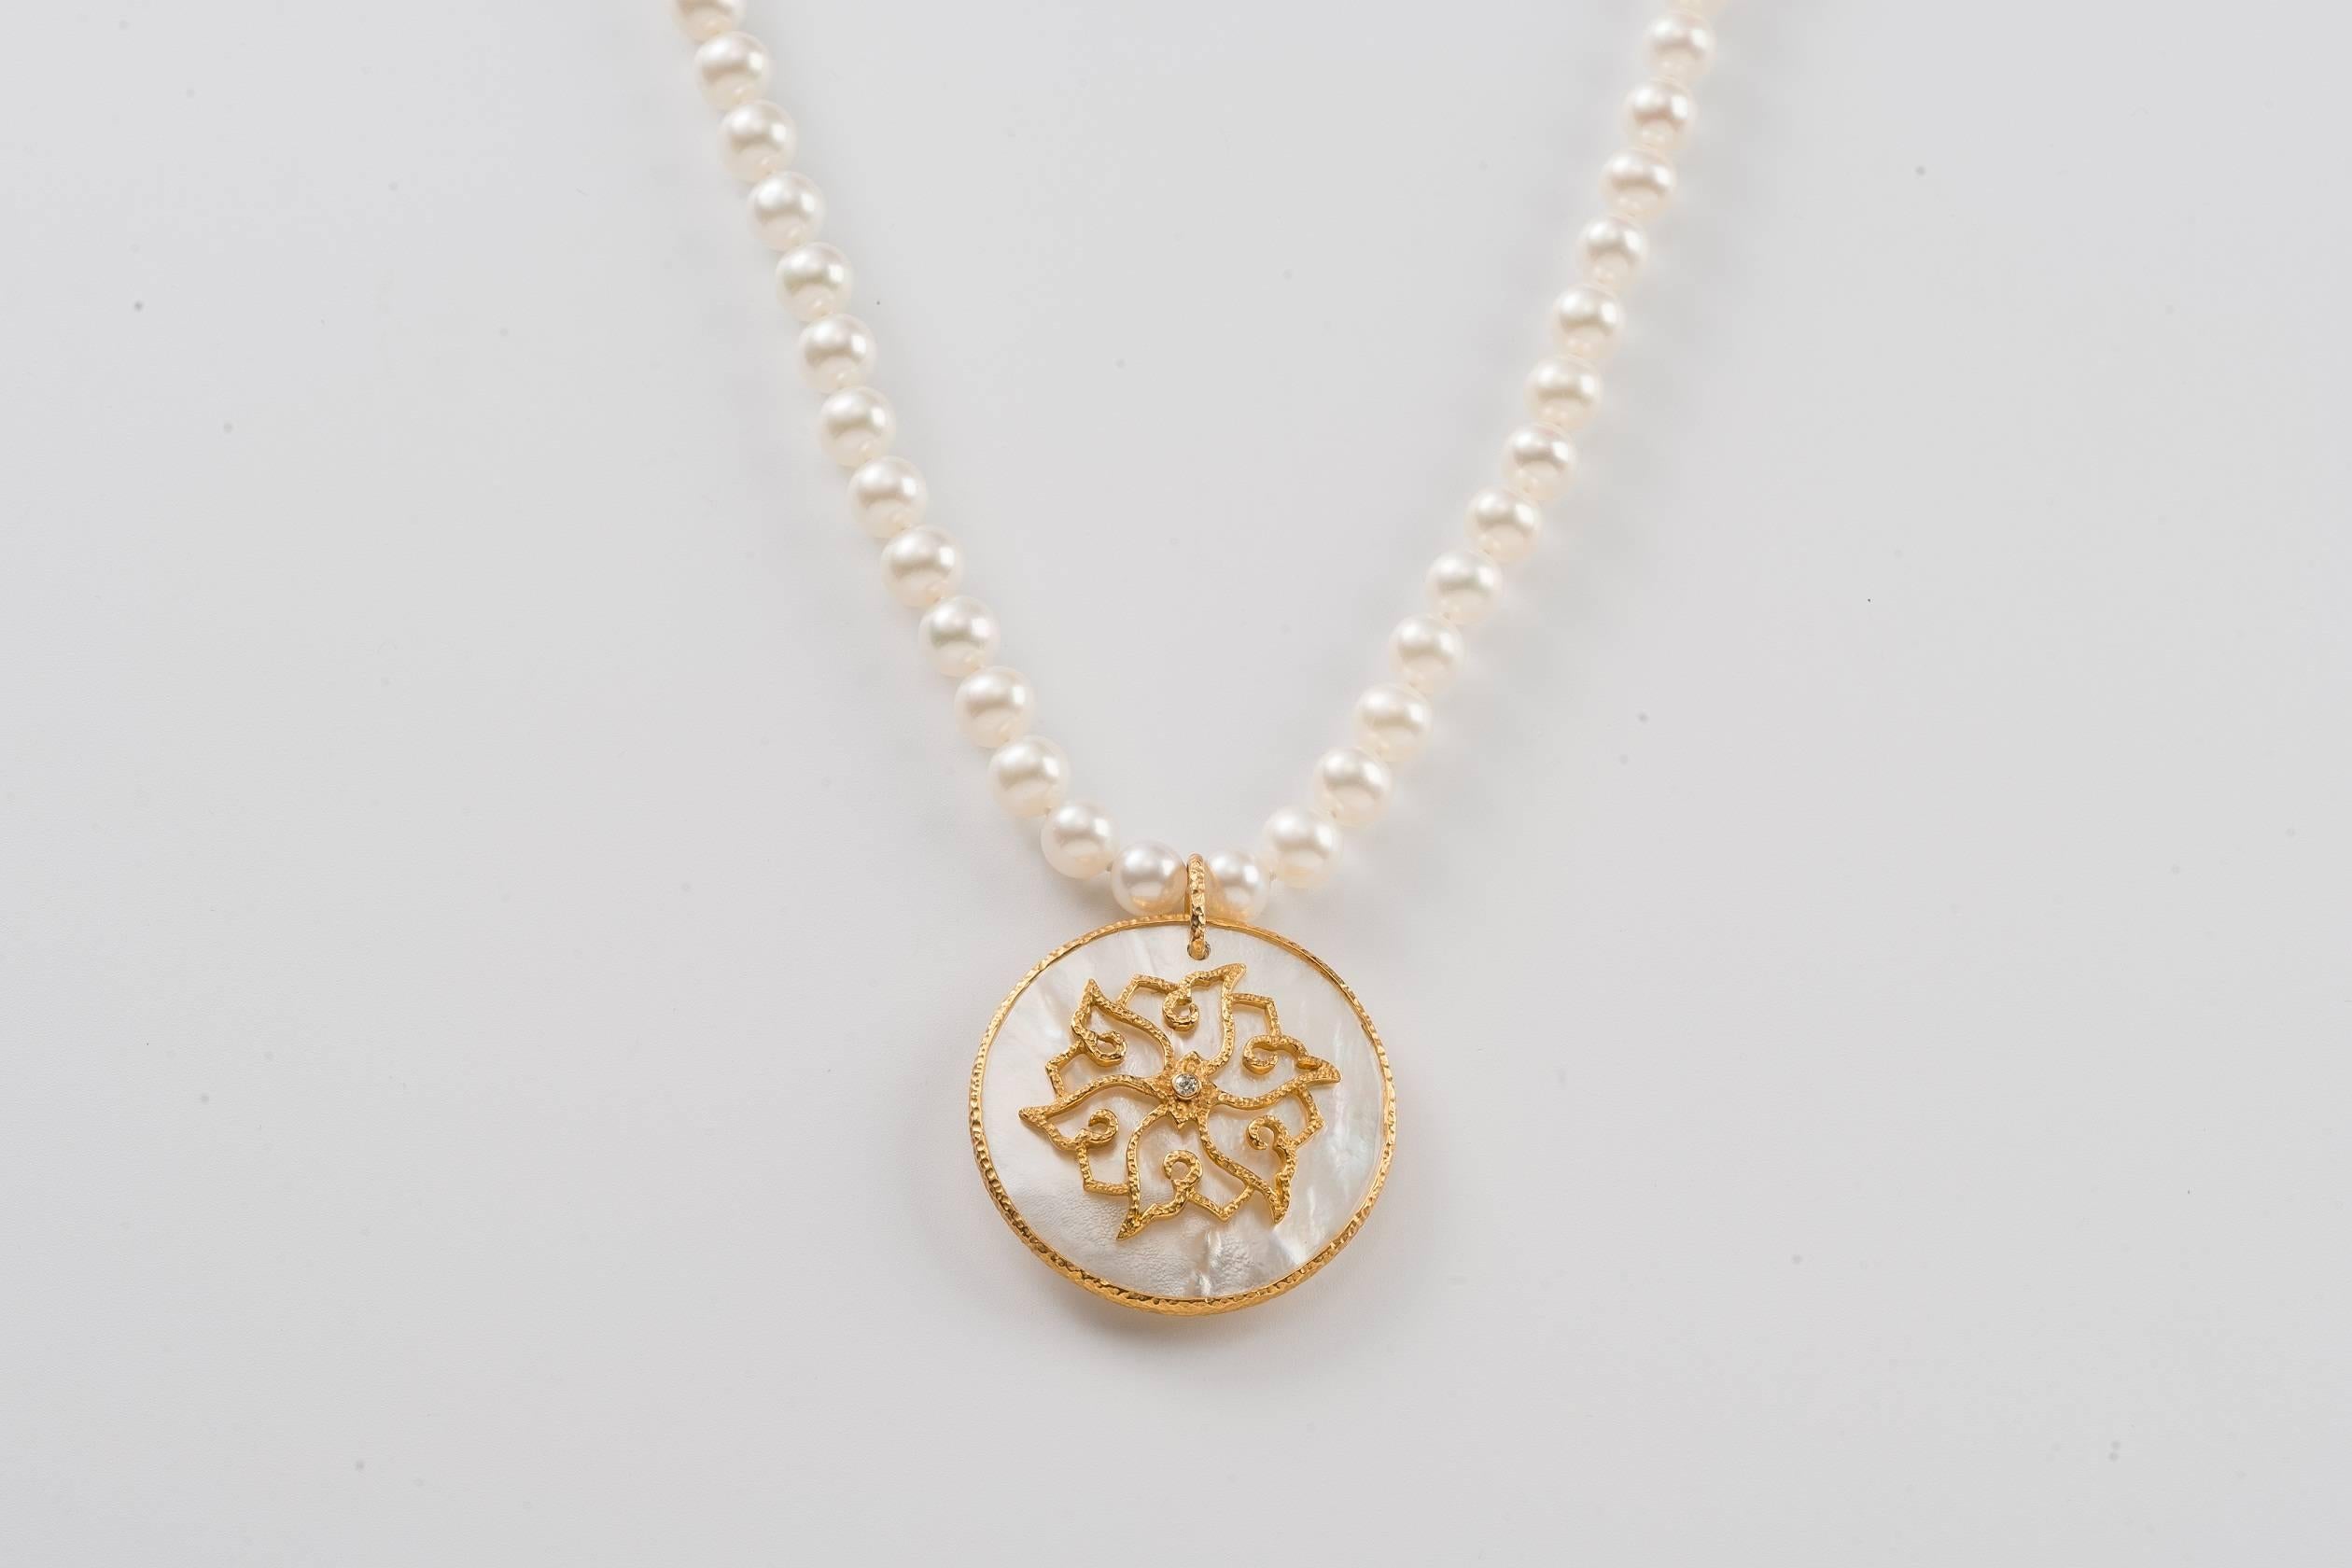 The 22.5 in L (57cm L) fresh water pearl necklace from our Heritage Collection of Chinoiserie designs, the luminous mother-of-pearl pendant is wrapped in hammered gold with a lotus motif design centered with a diamond, 1.5 in (4cm) dia. The lotus is